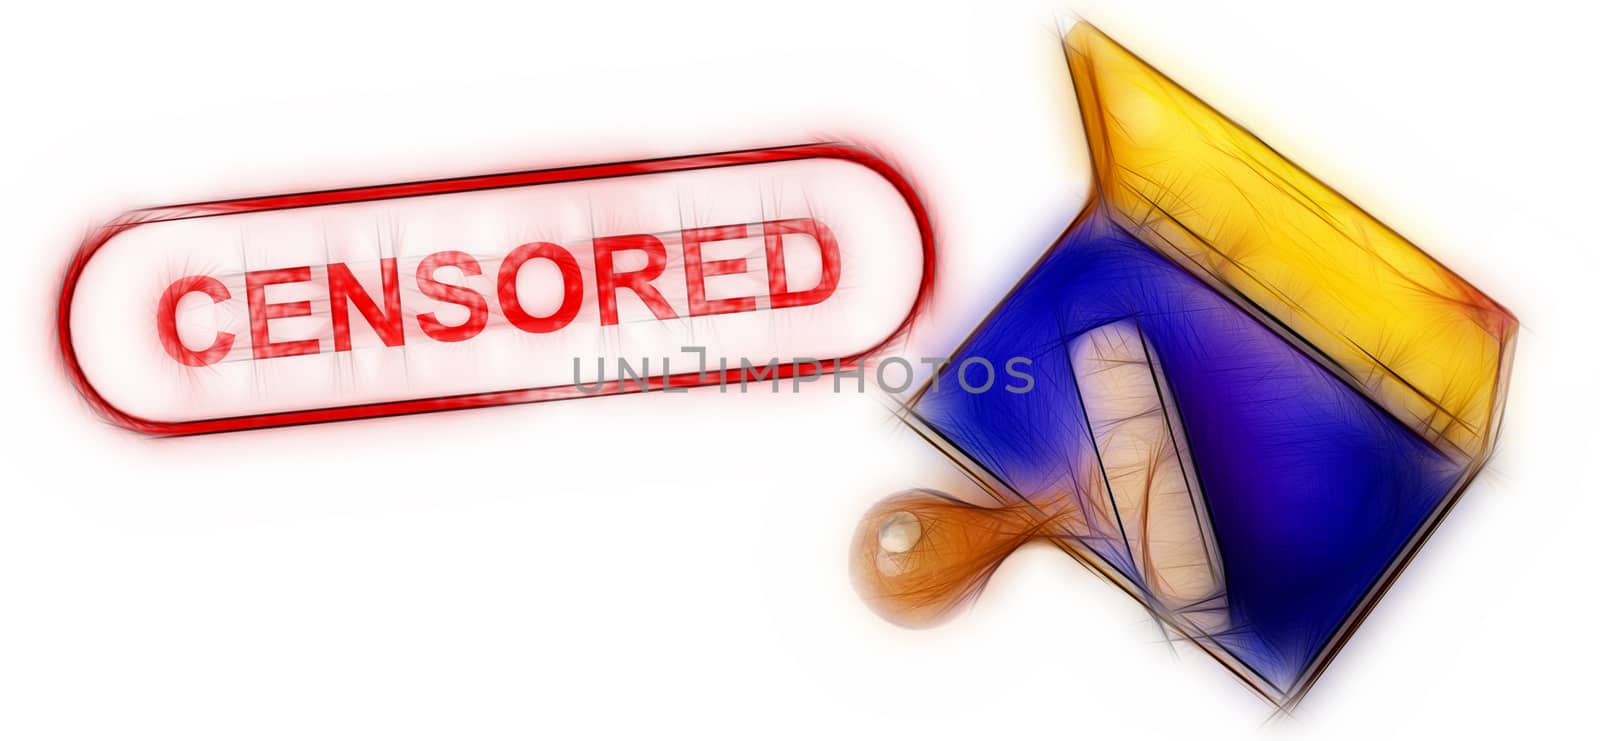 Top view of a rubber stamp with a giant word "CENSORED" printed, isolated on white background.